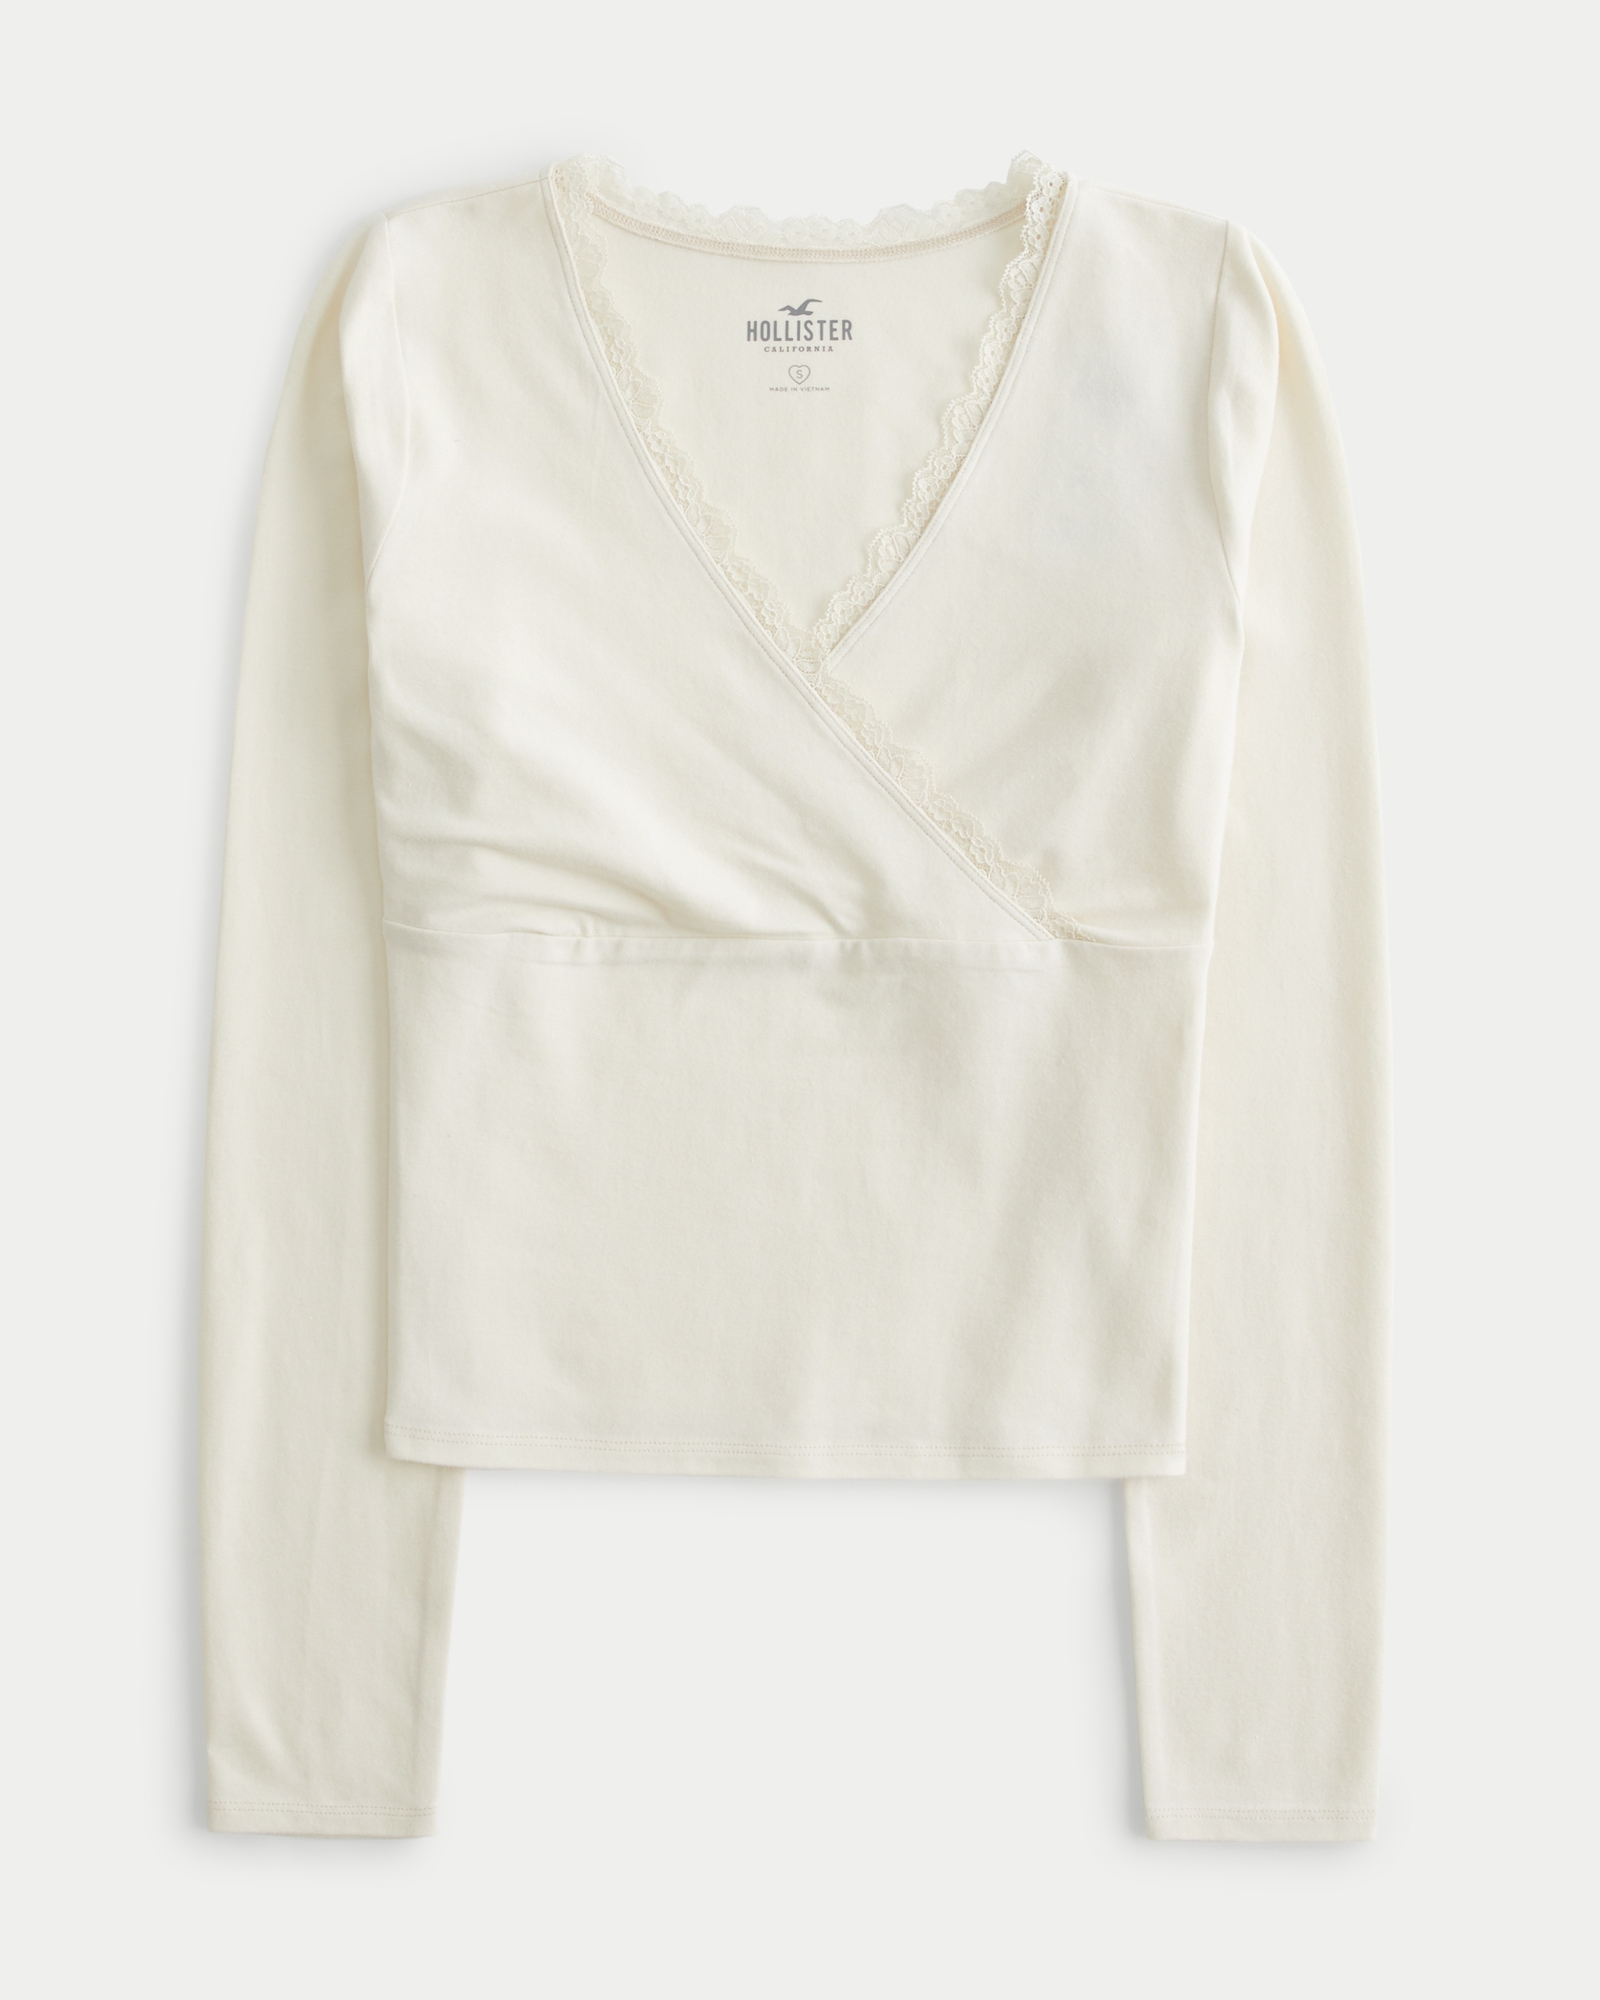 Hollister long sleeve satin blouse with lace trim in white